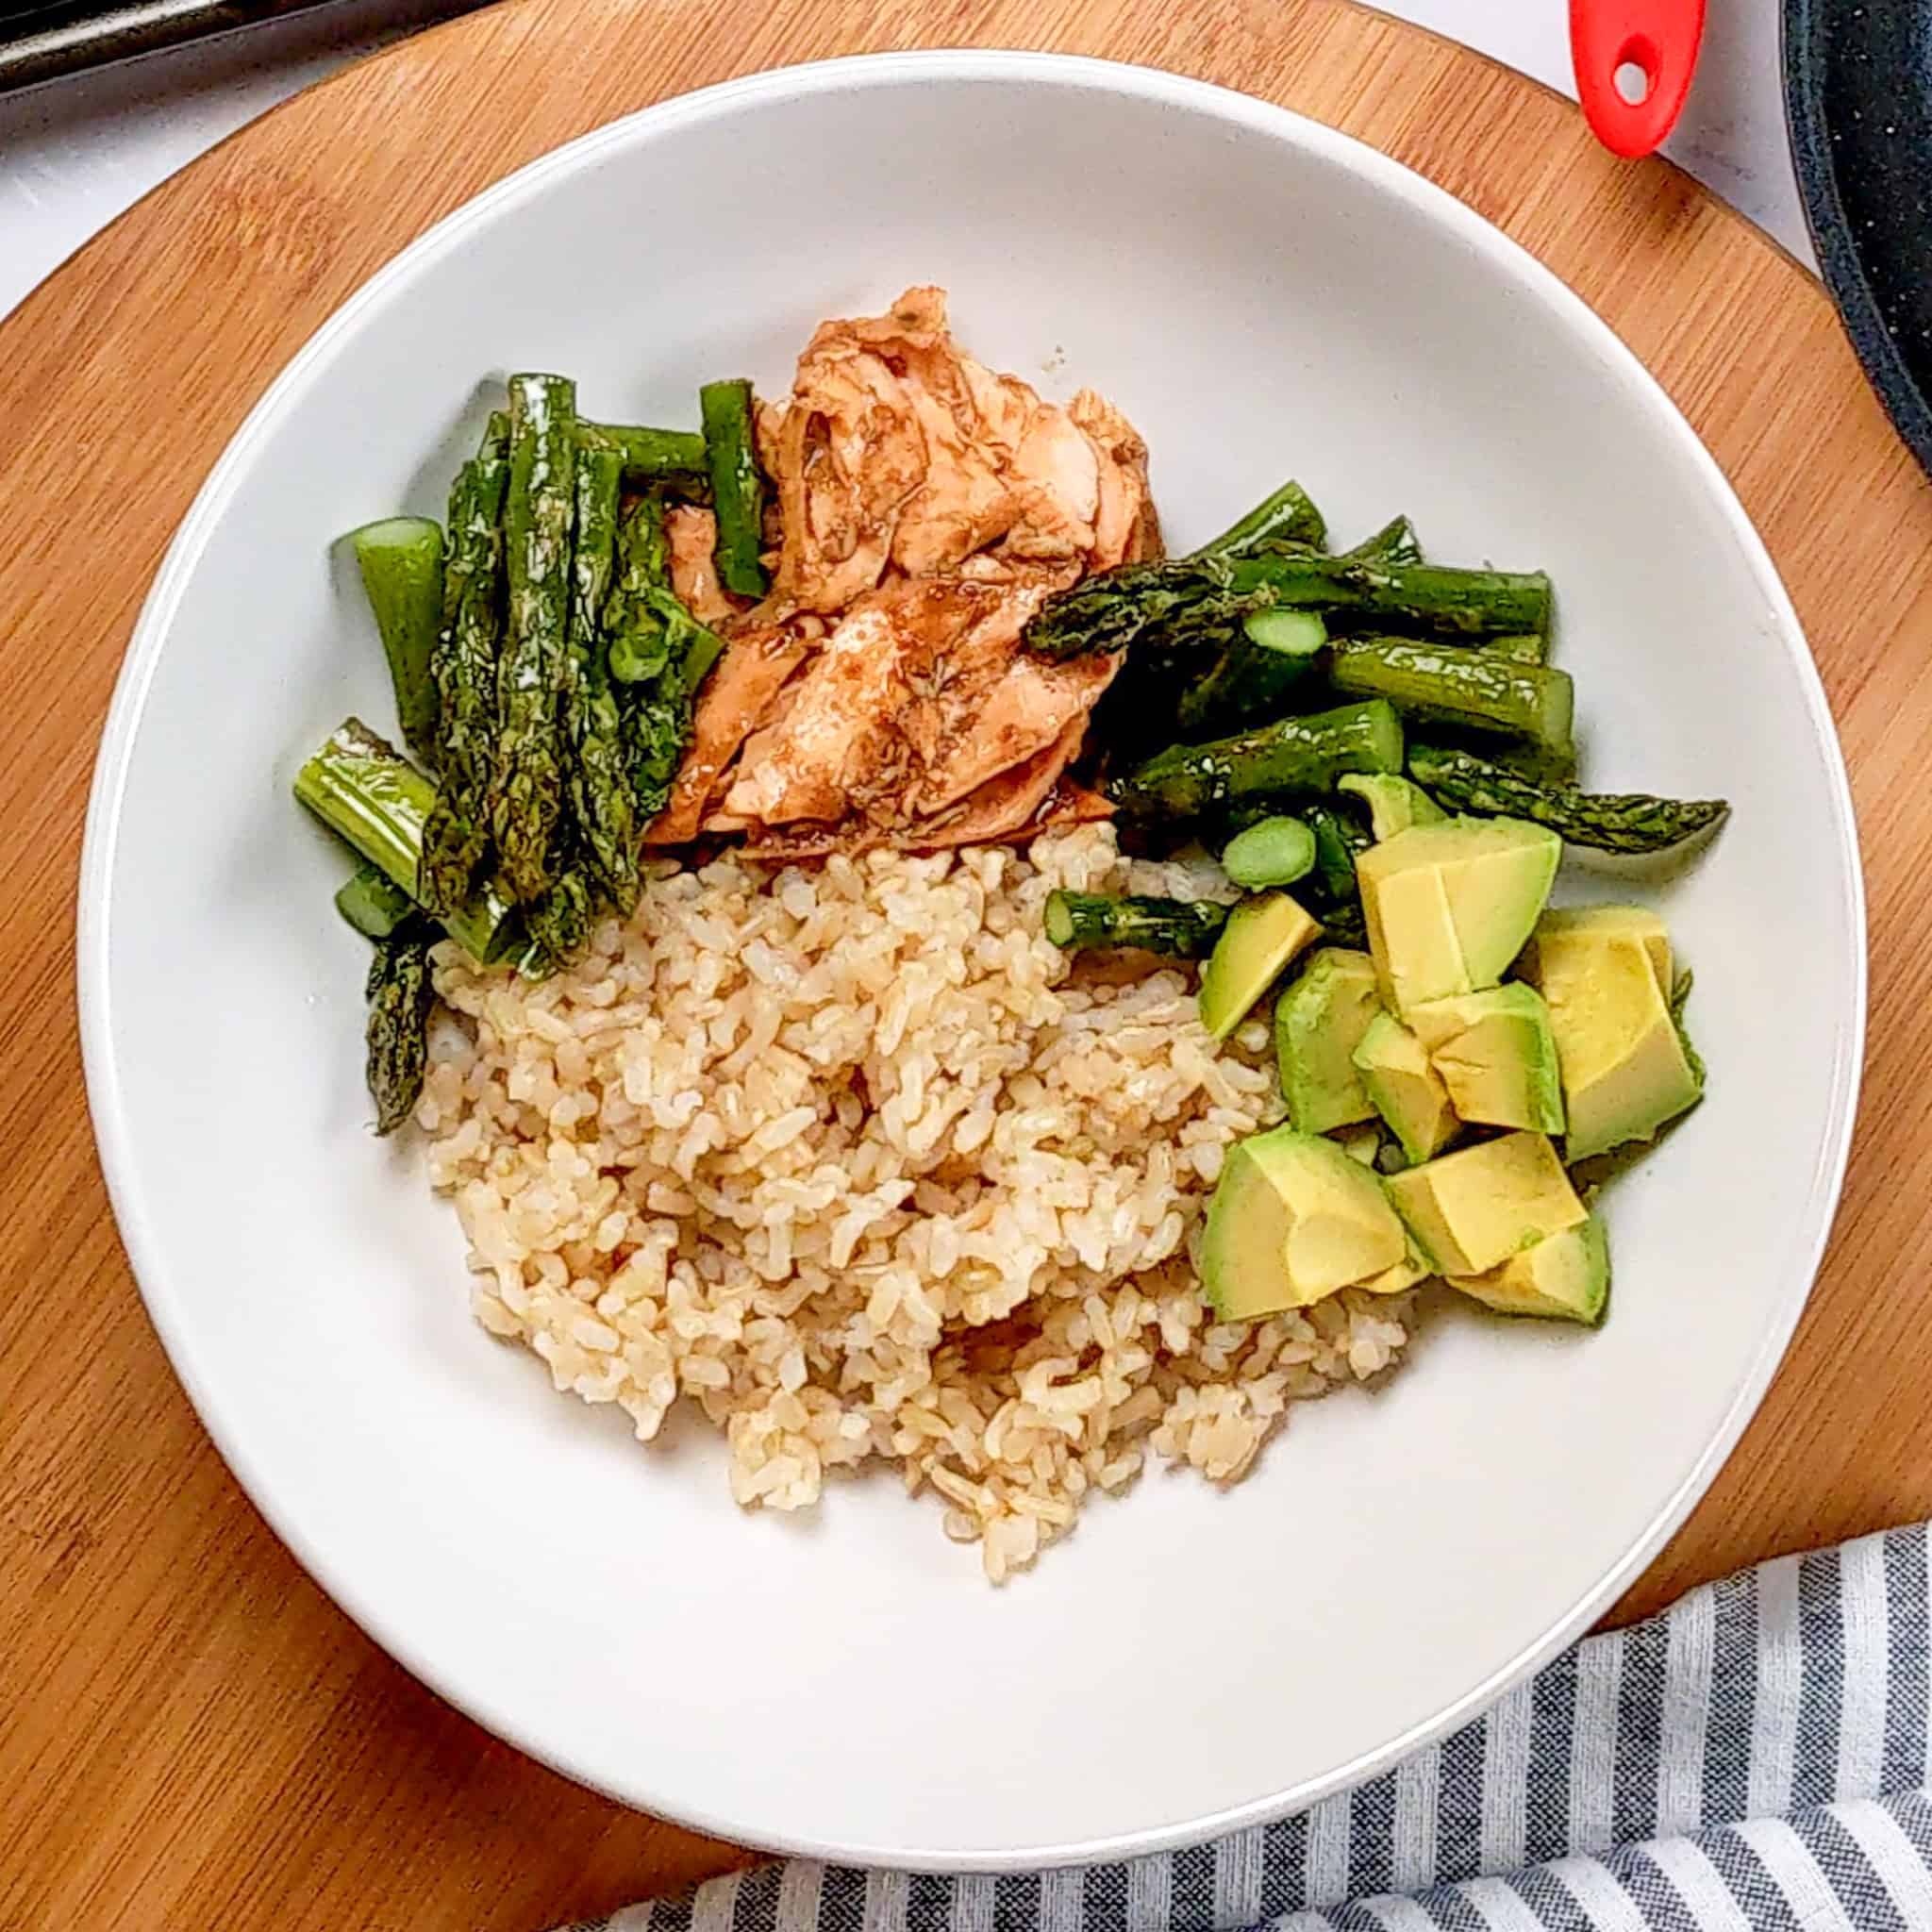 flaked miso salmon, asparagus, avocado chunks and brown rice assembled in a wide rim bowl.